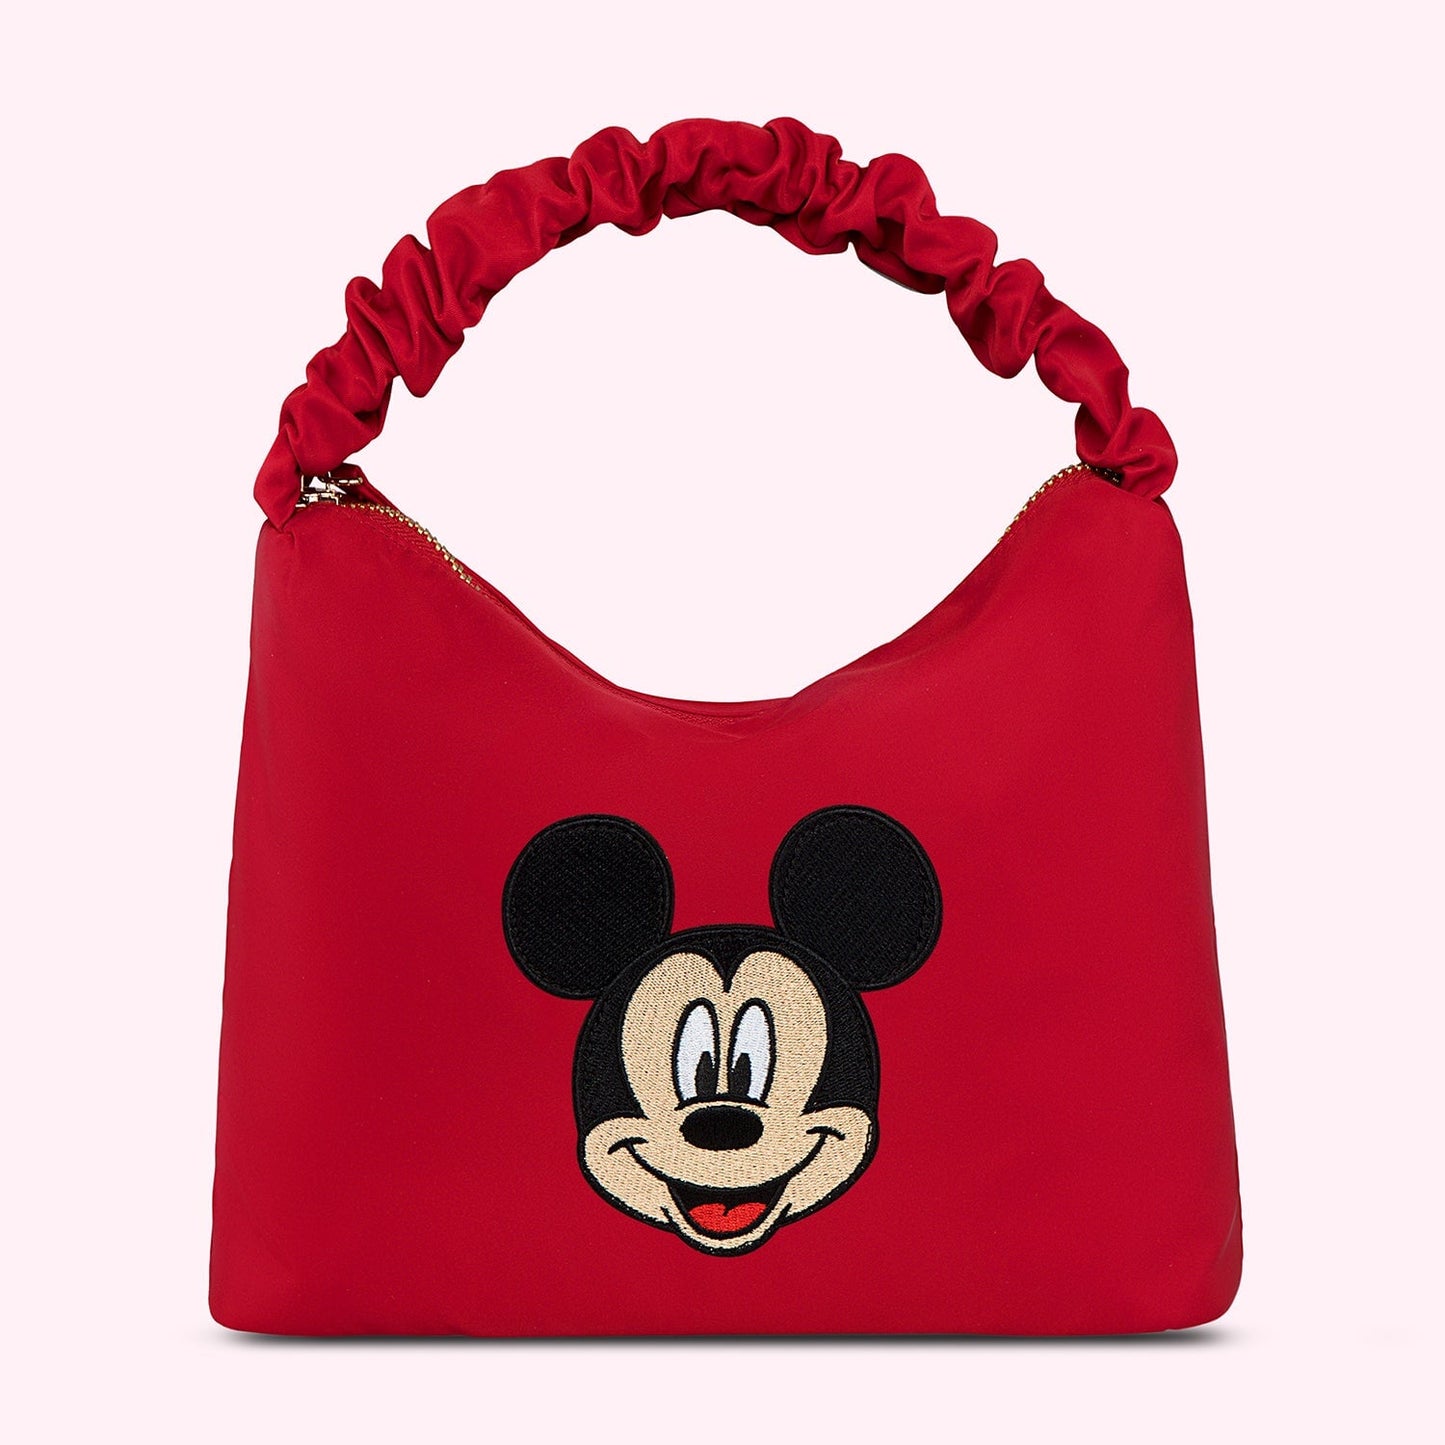 Copy of Ruby Scrunch Handle Bag with Medium Mickey Patch